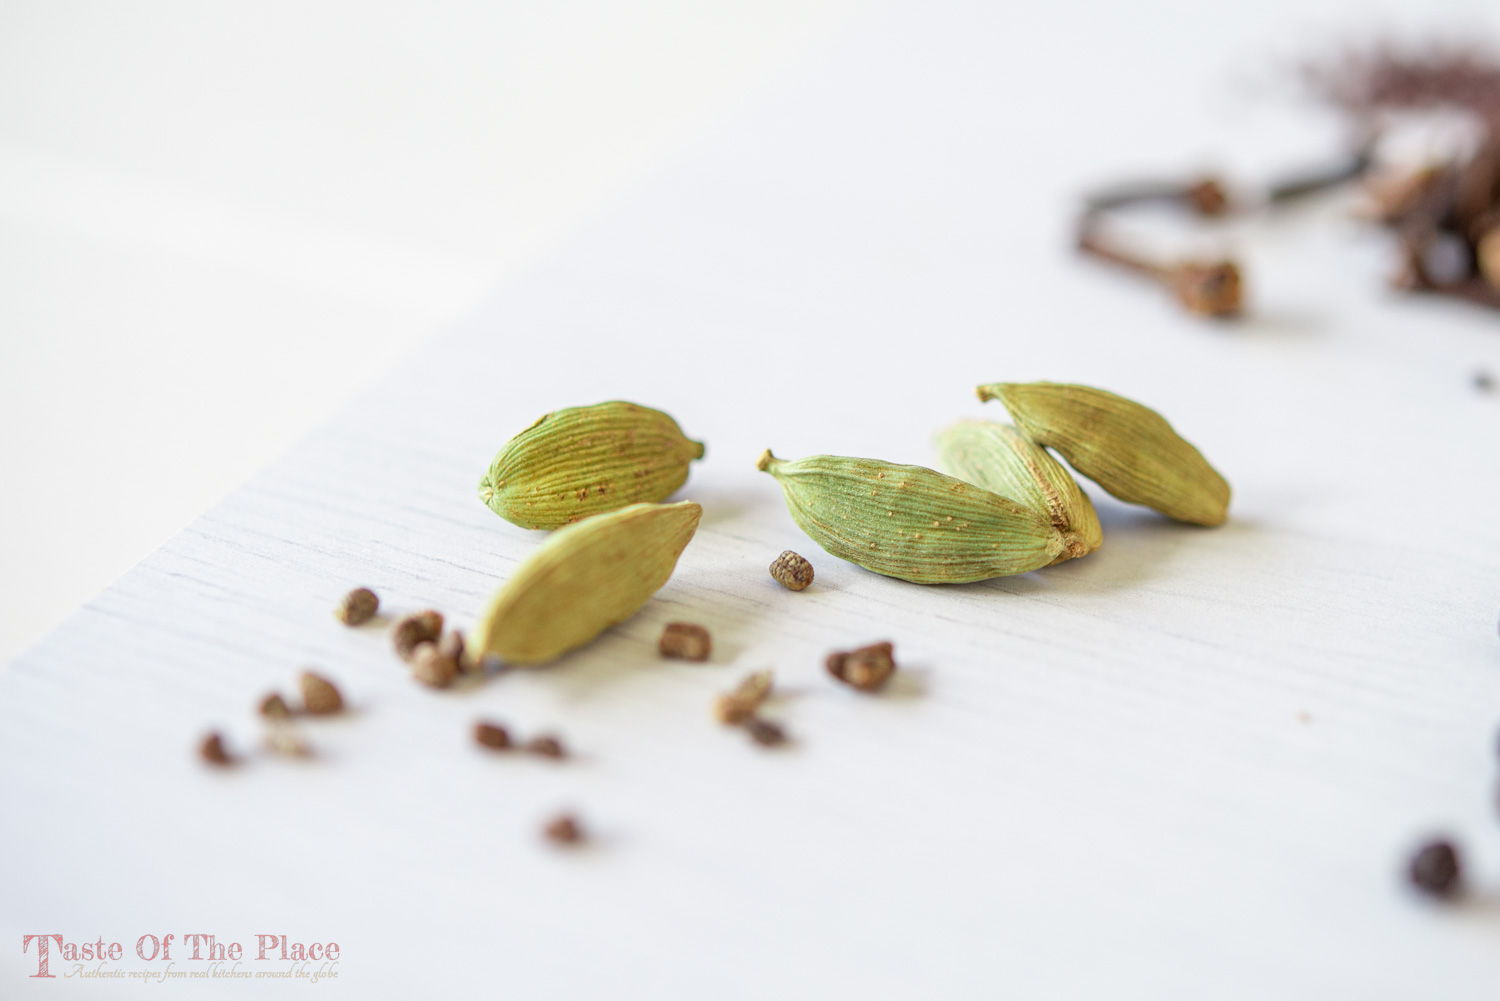 Green cardamom pods and inner seeds